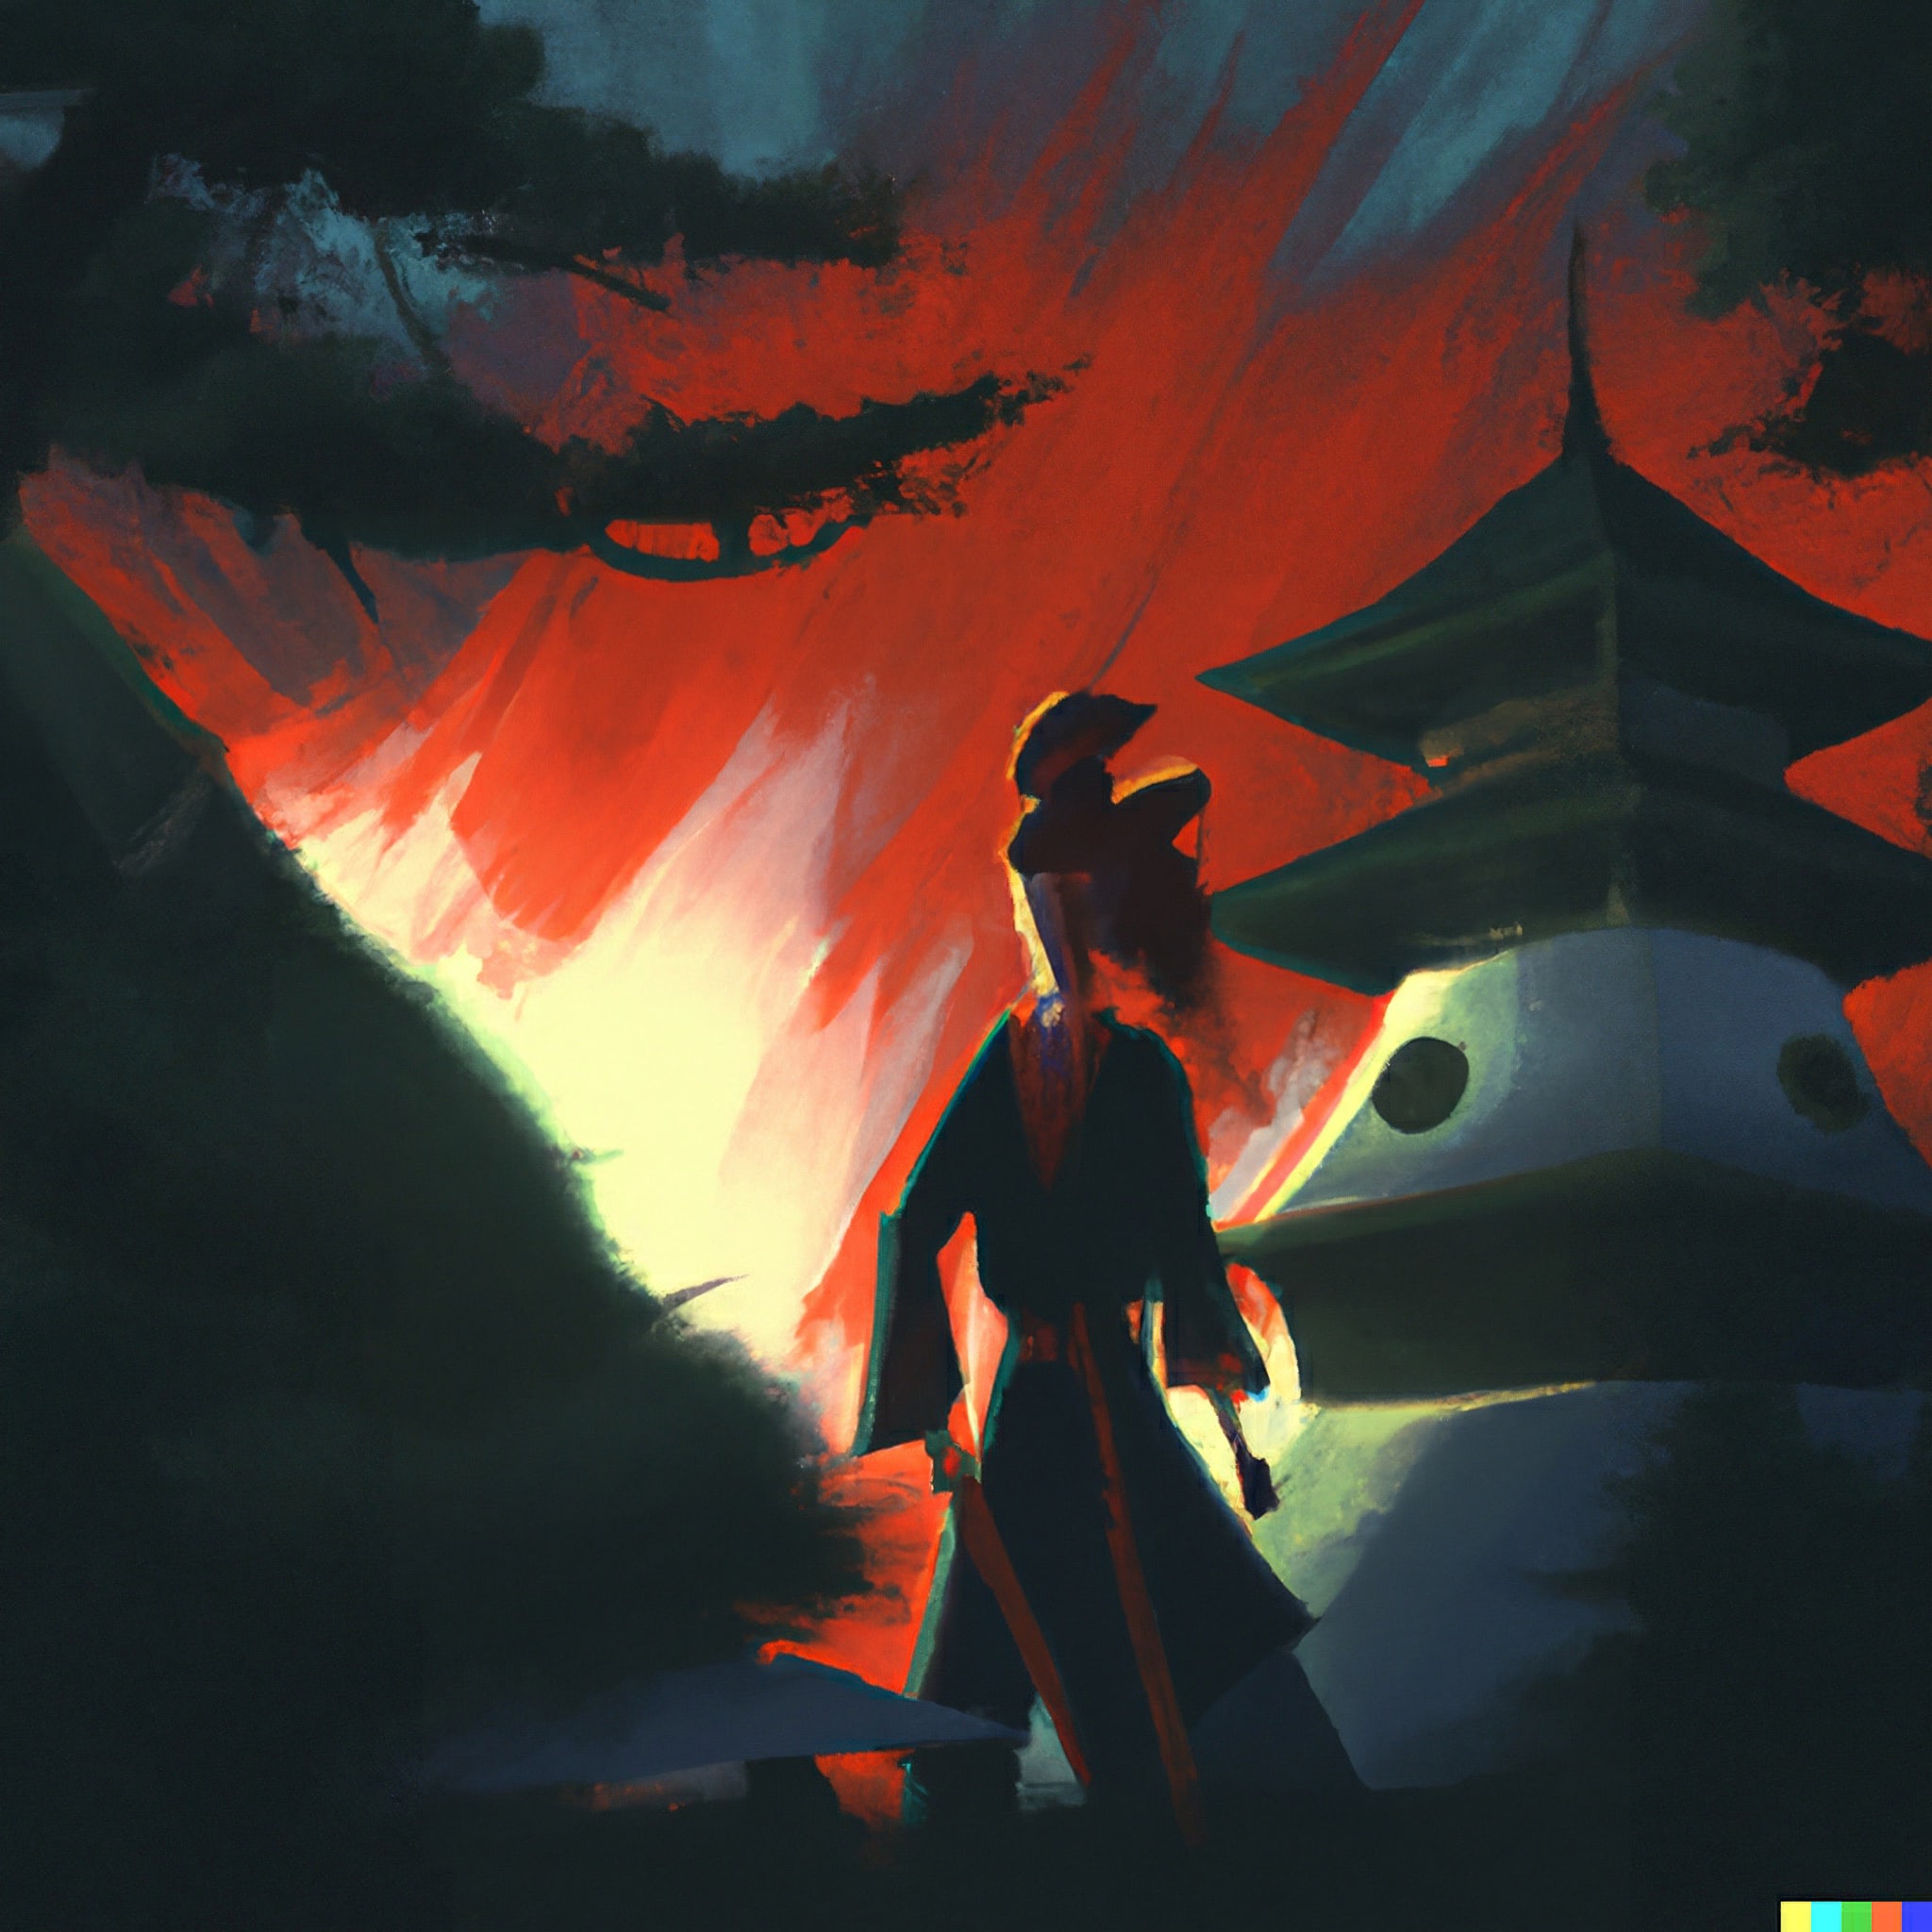 japanese-pagoda-in-china-in-a-dark-forest-with-a-female-samurai-in-the-foreground-1